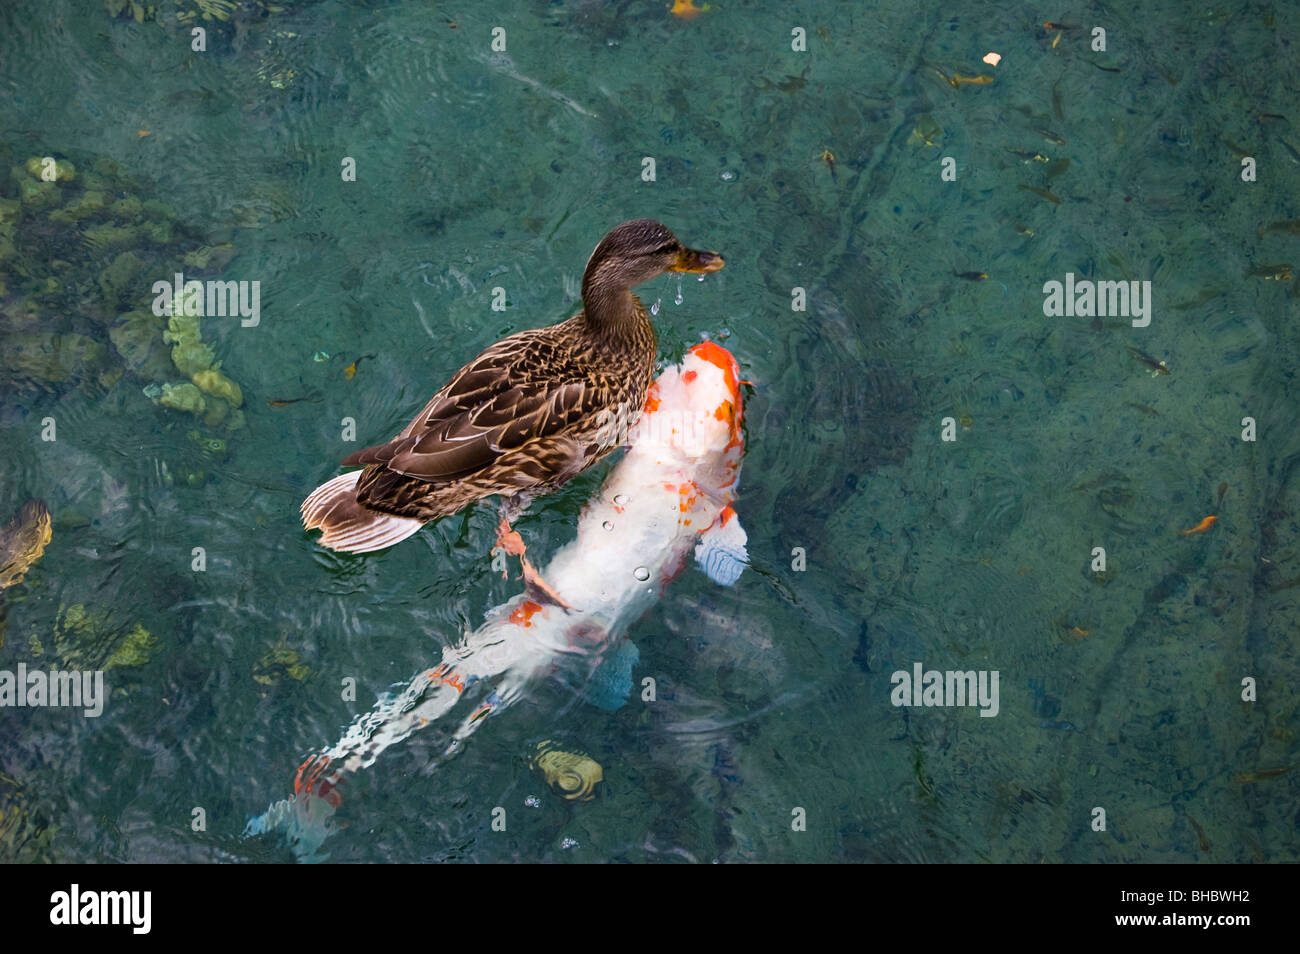 A duck and a fish swim in a pond. Stock Photo